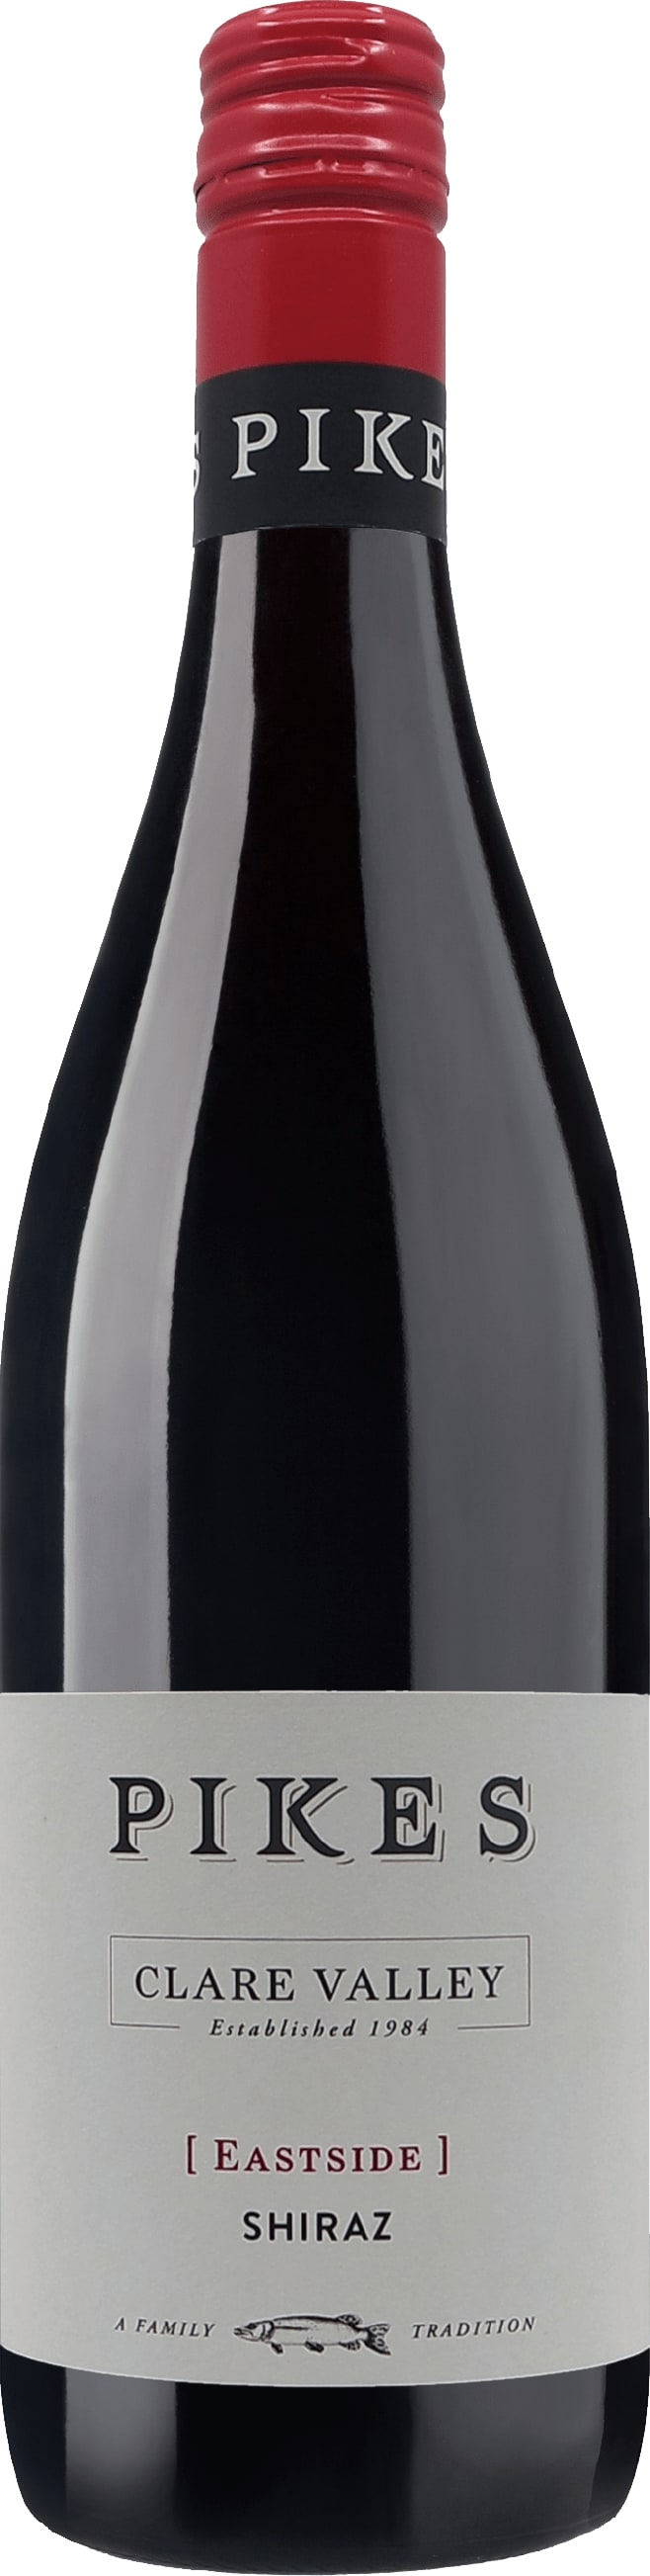 Pikes Eastside Shiraz 2017 75cl - Buy Pikes Wines from GREAT WINES DIRECT wine shop